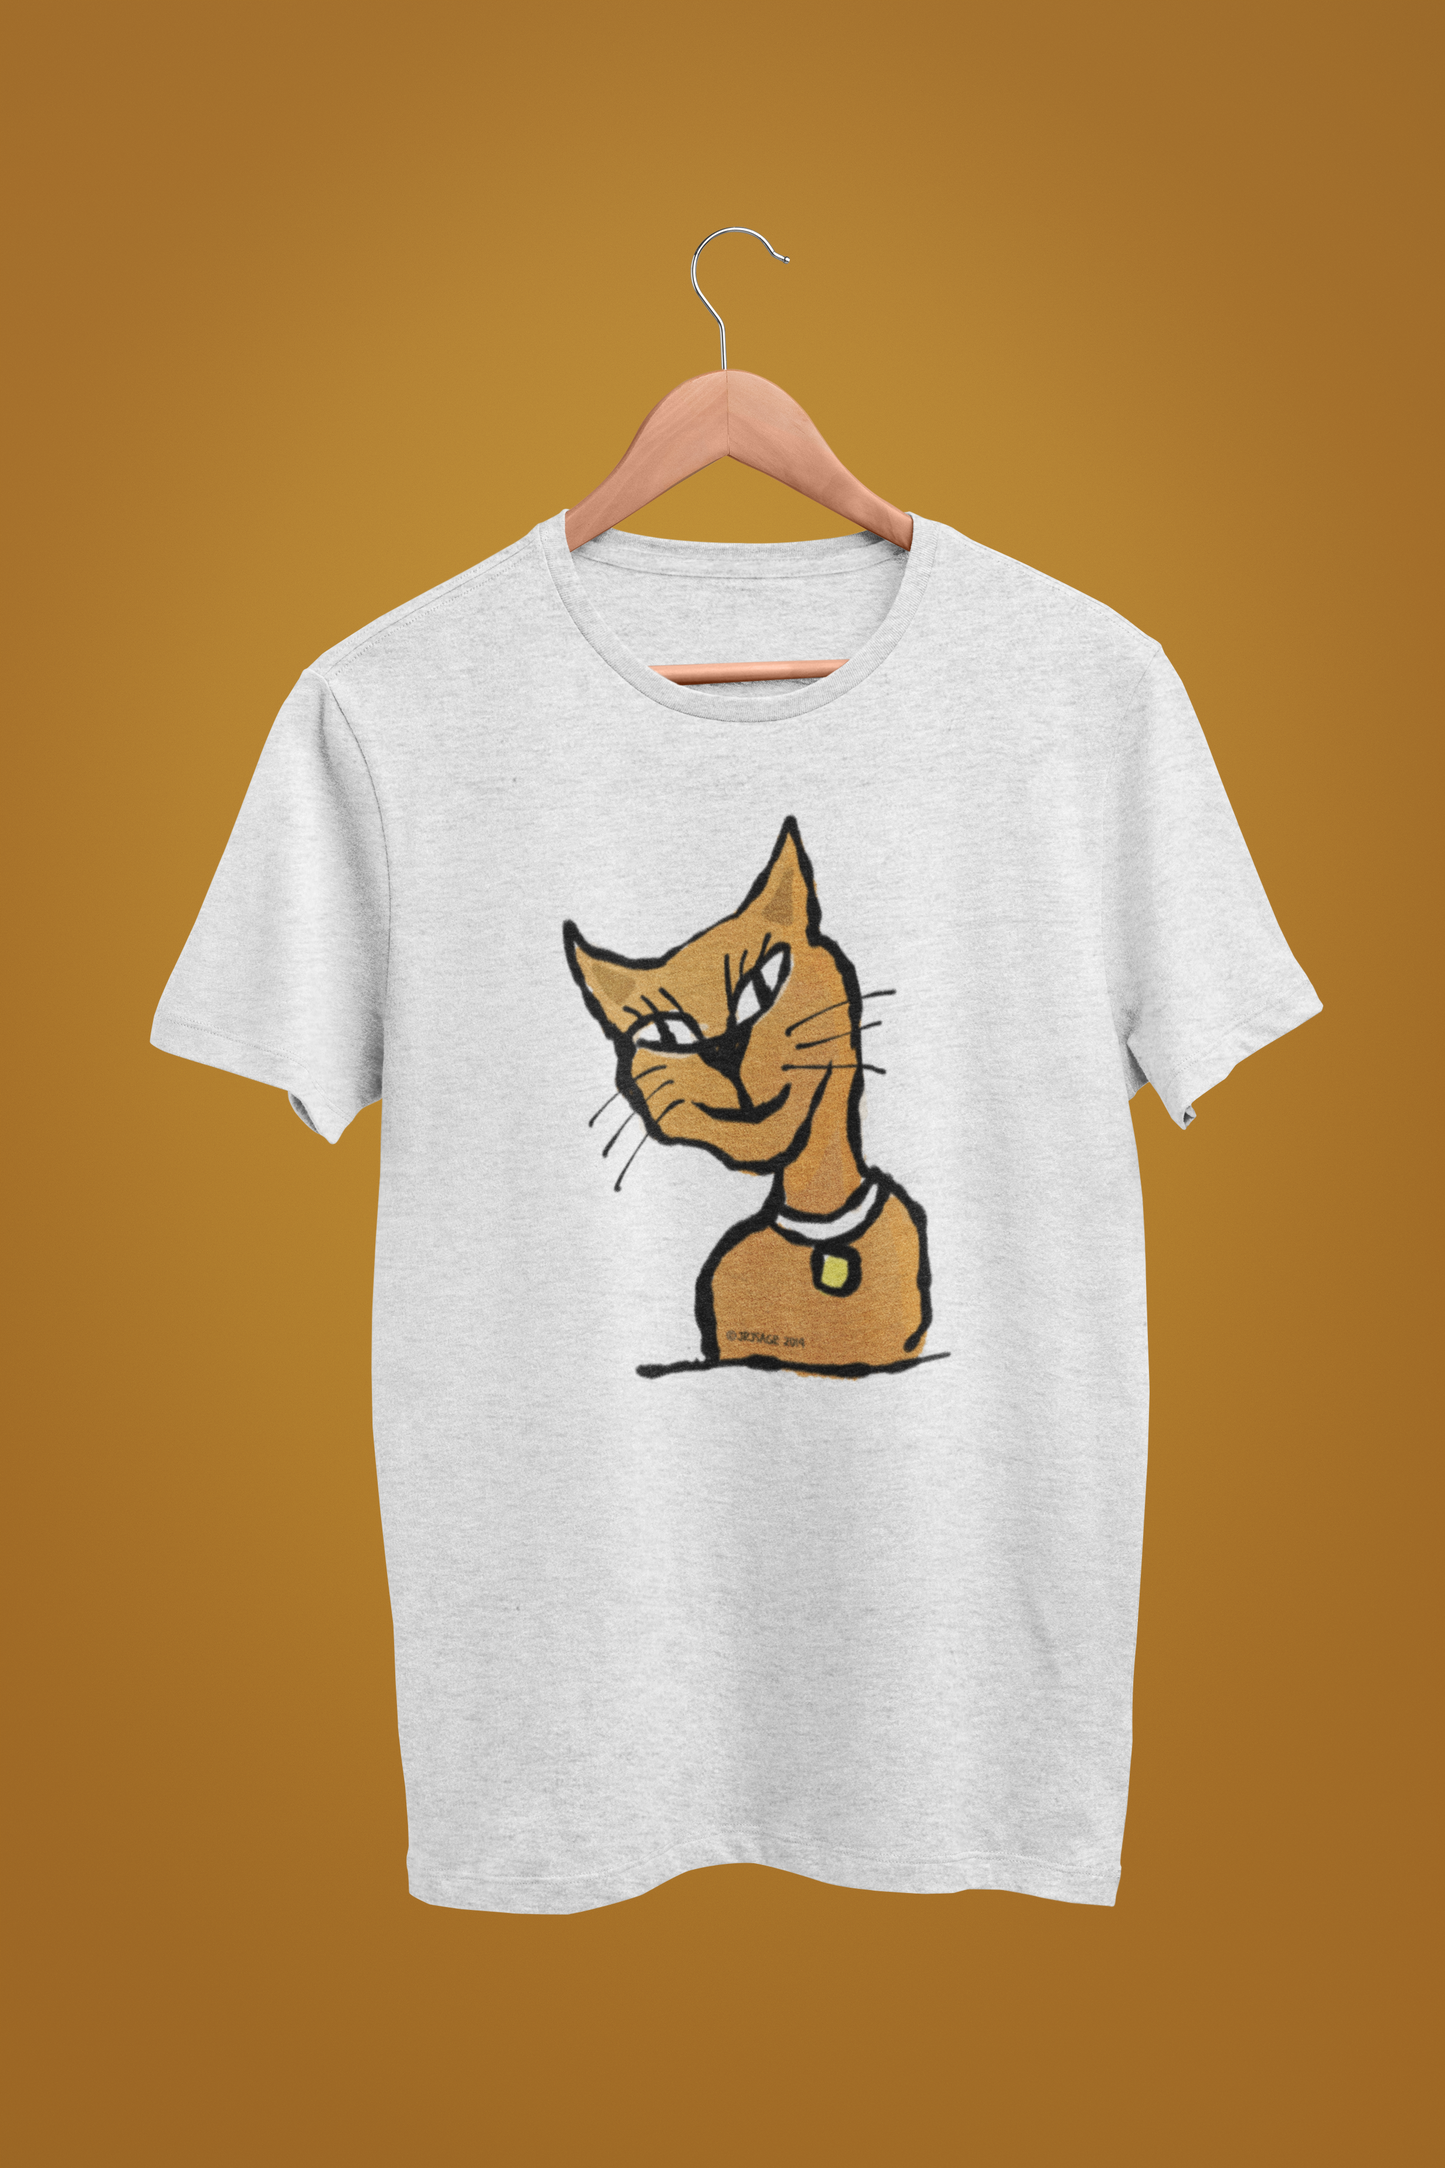 Ginger Cat T-shirt - Illustrated cream heather grey colour vegan cotton Cat T-shirts by Hector and Bone for Cat Lovers